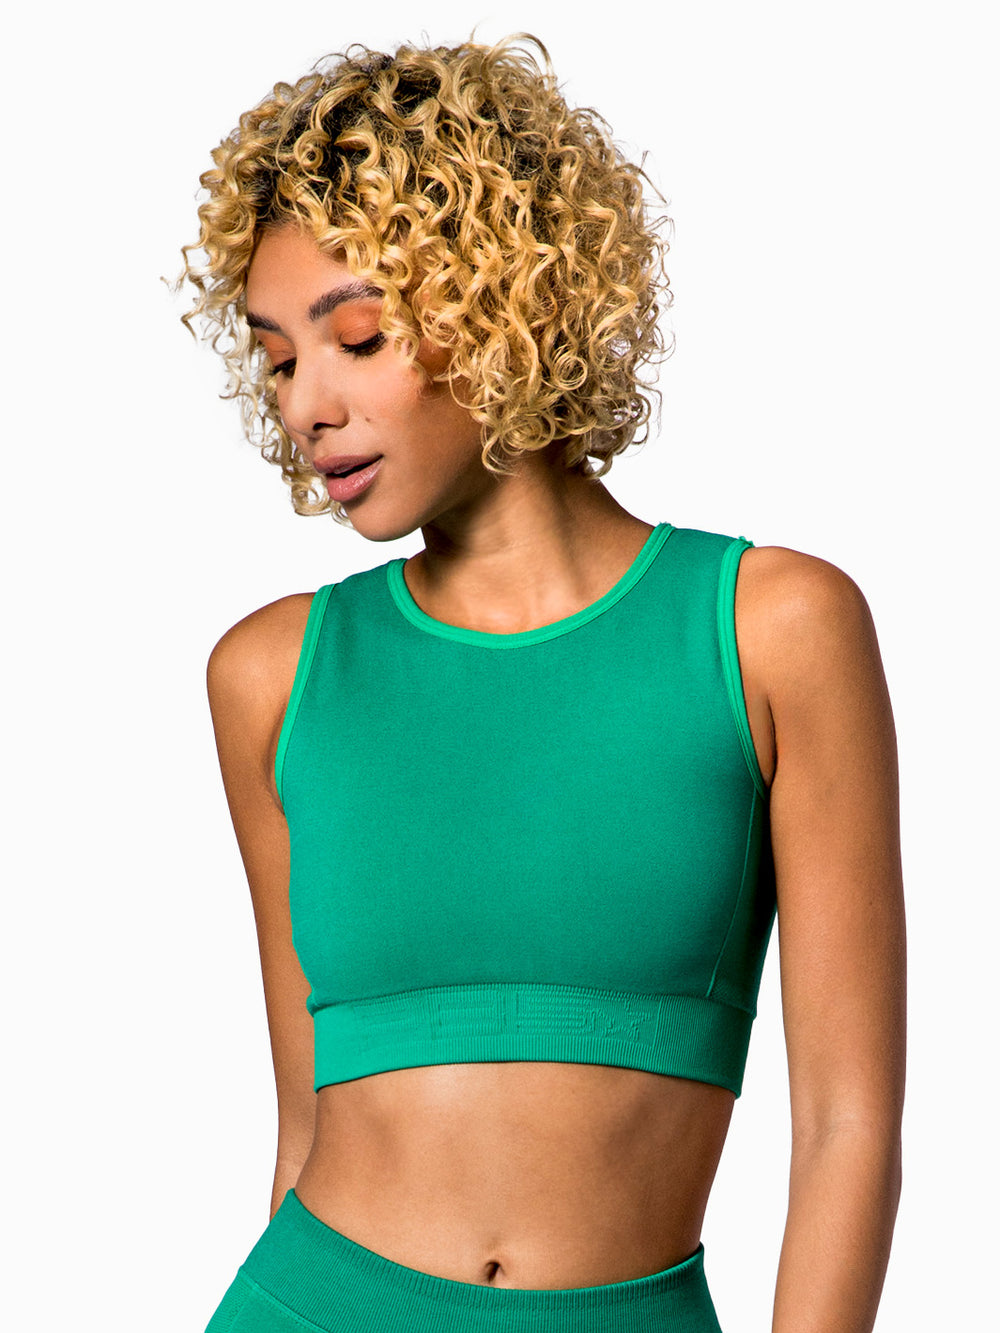 Model wearing PB5star's jade Compression Knit Sports Bra with a sleek, supportive design.